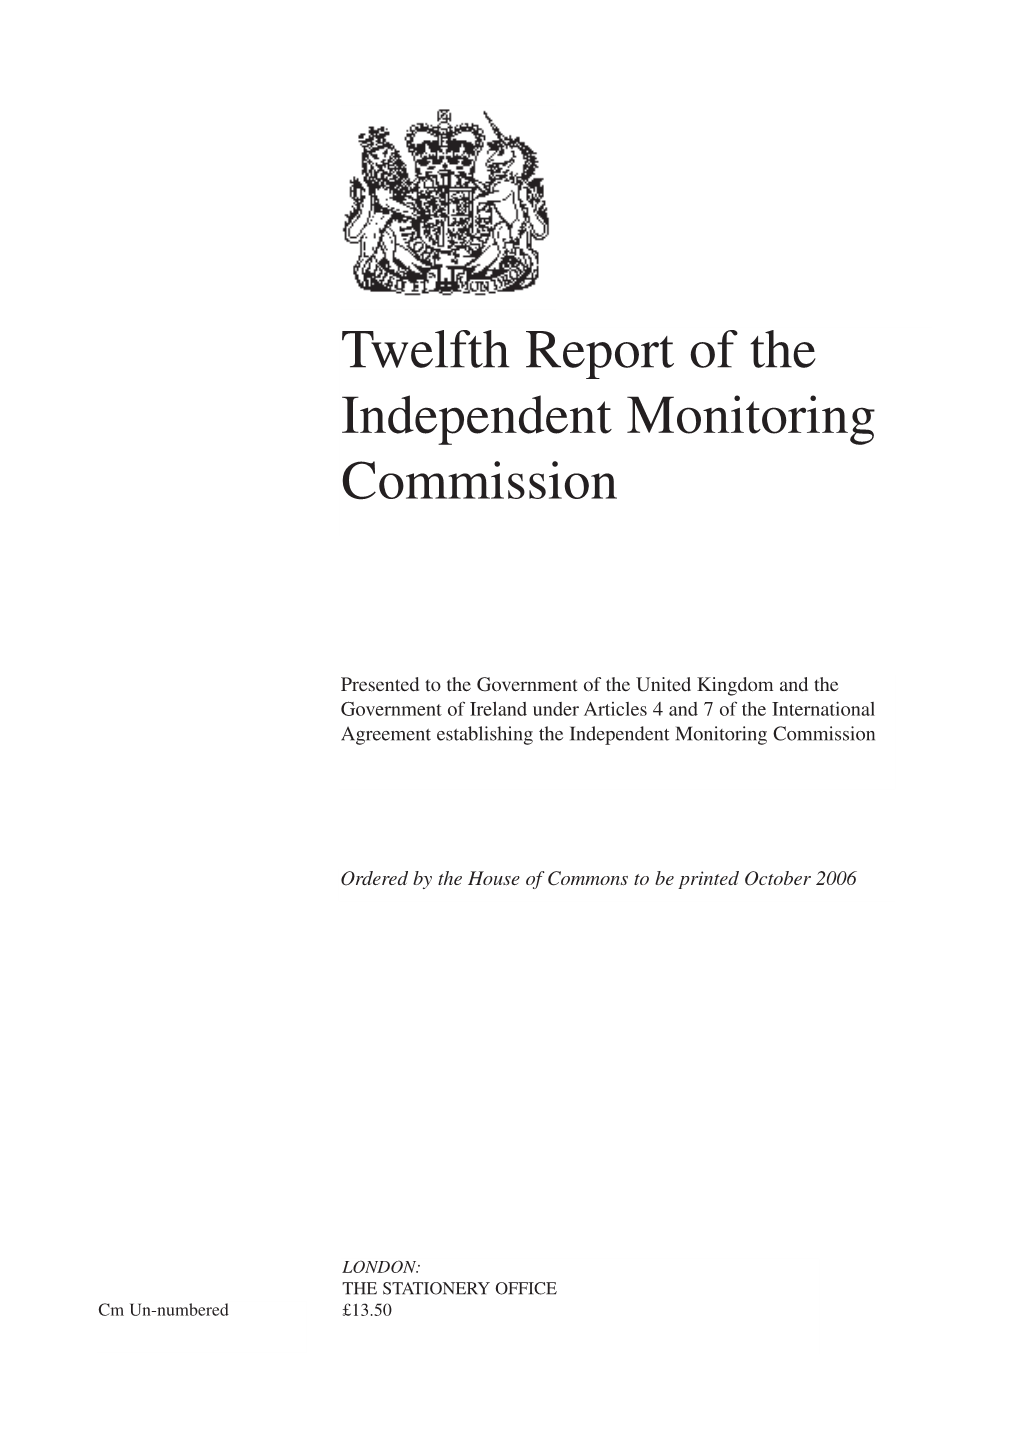 Twelfth Report of the Independent Monitoring Commission